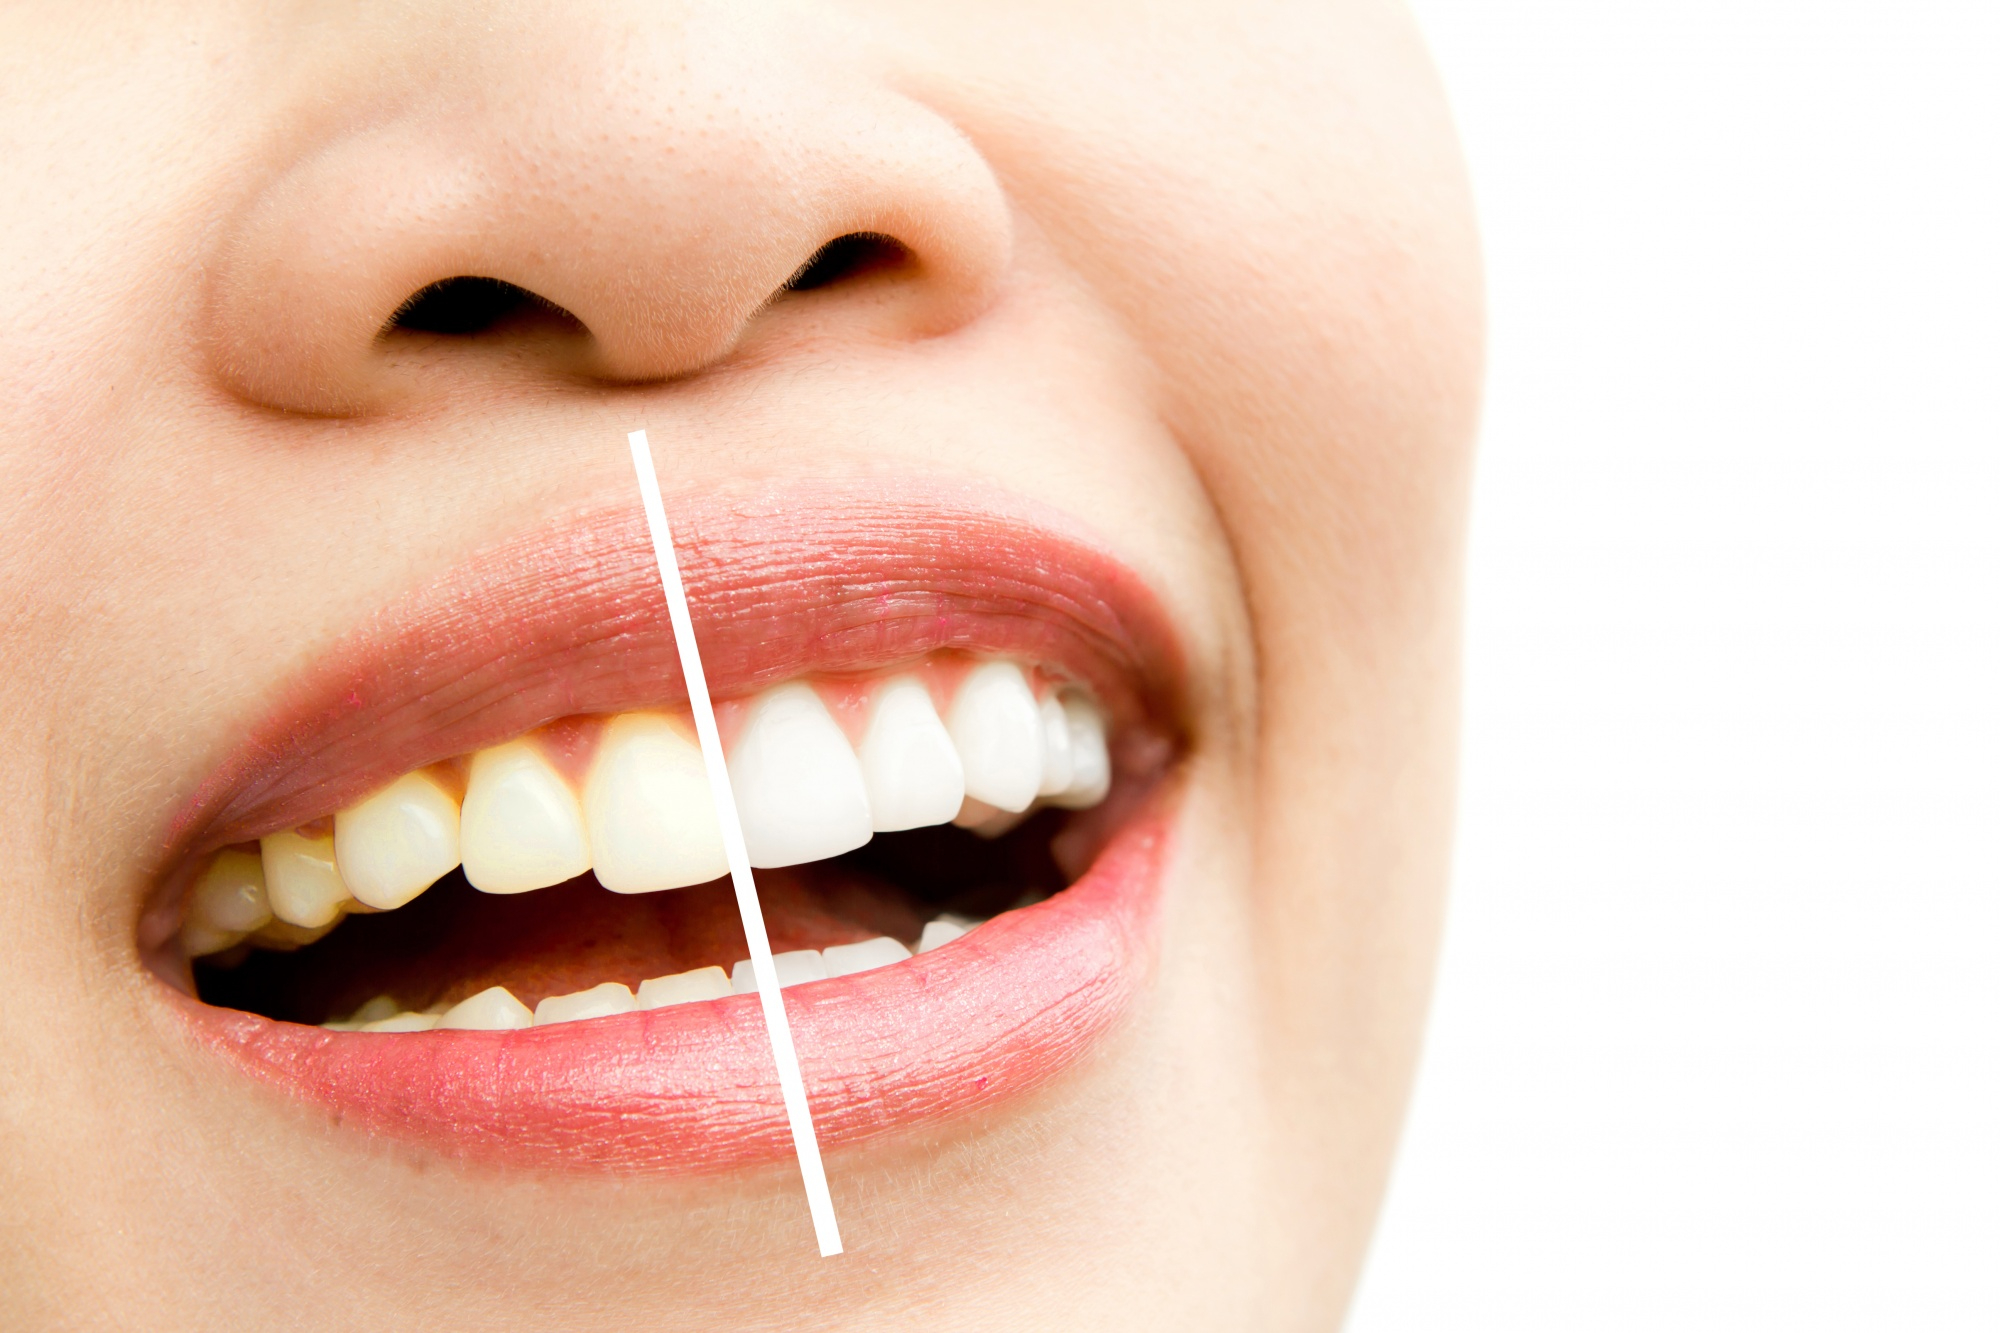 Achieve a Hollywood Smile at Home – A 3-Step Teeth Whitening Routine for Radiant Results